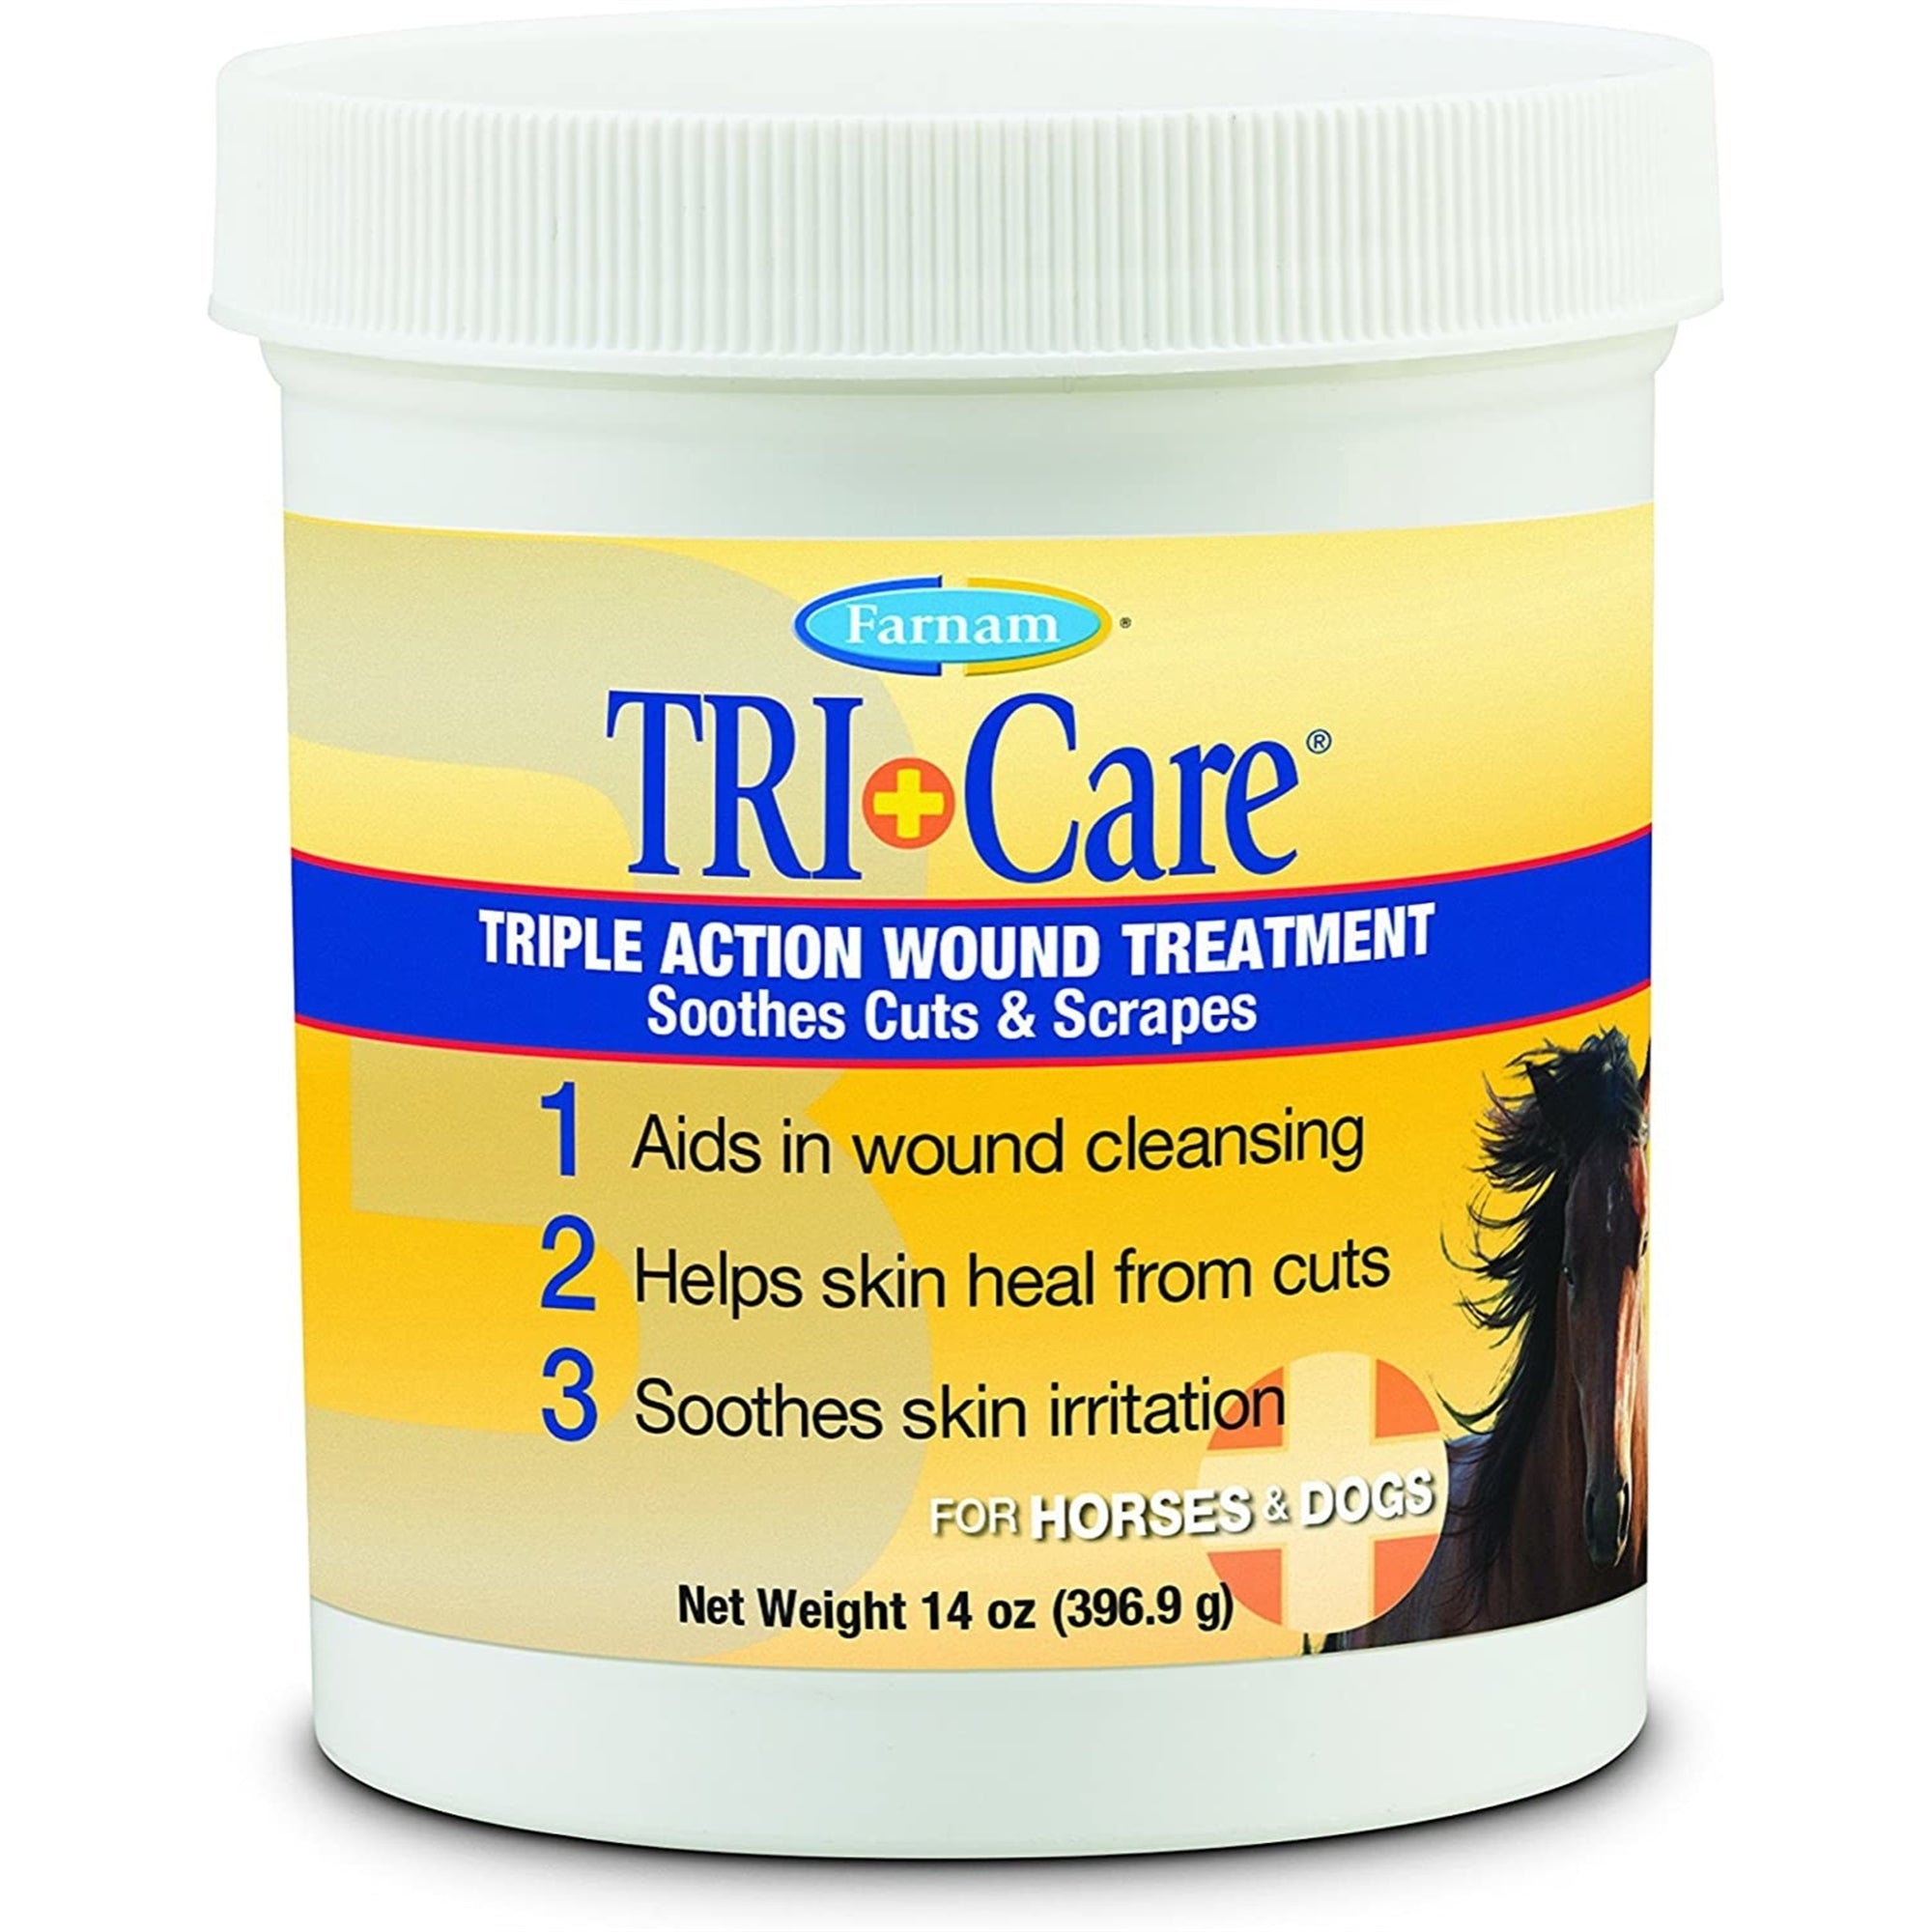 Farnam Triple Action Wound Care for Dogs & Horses, 14 oz